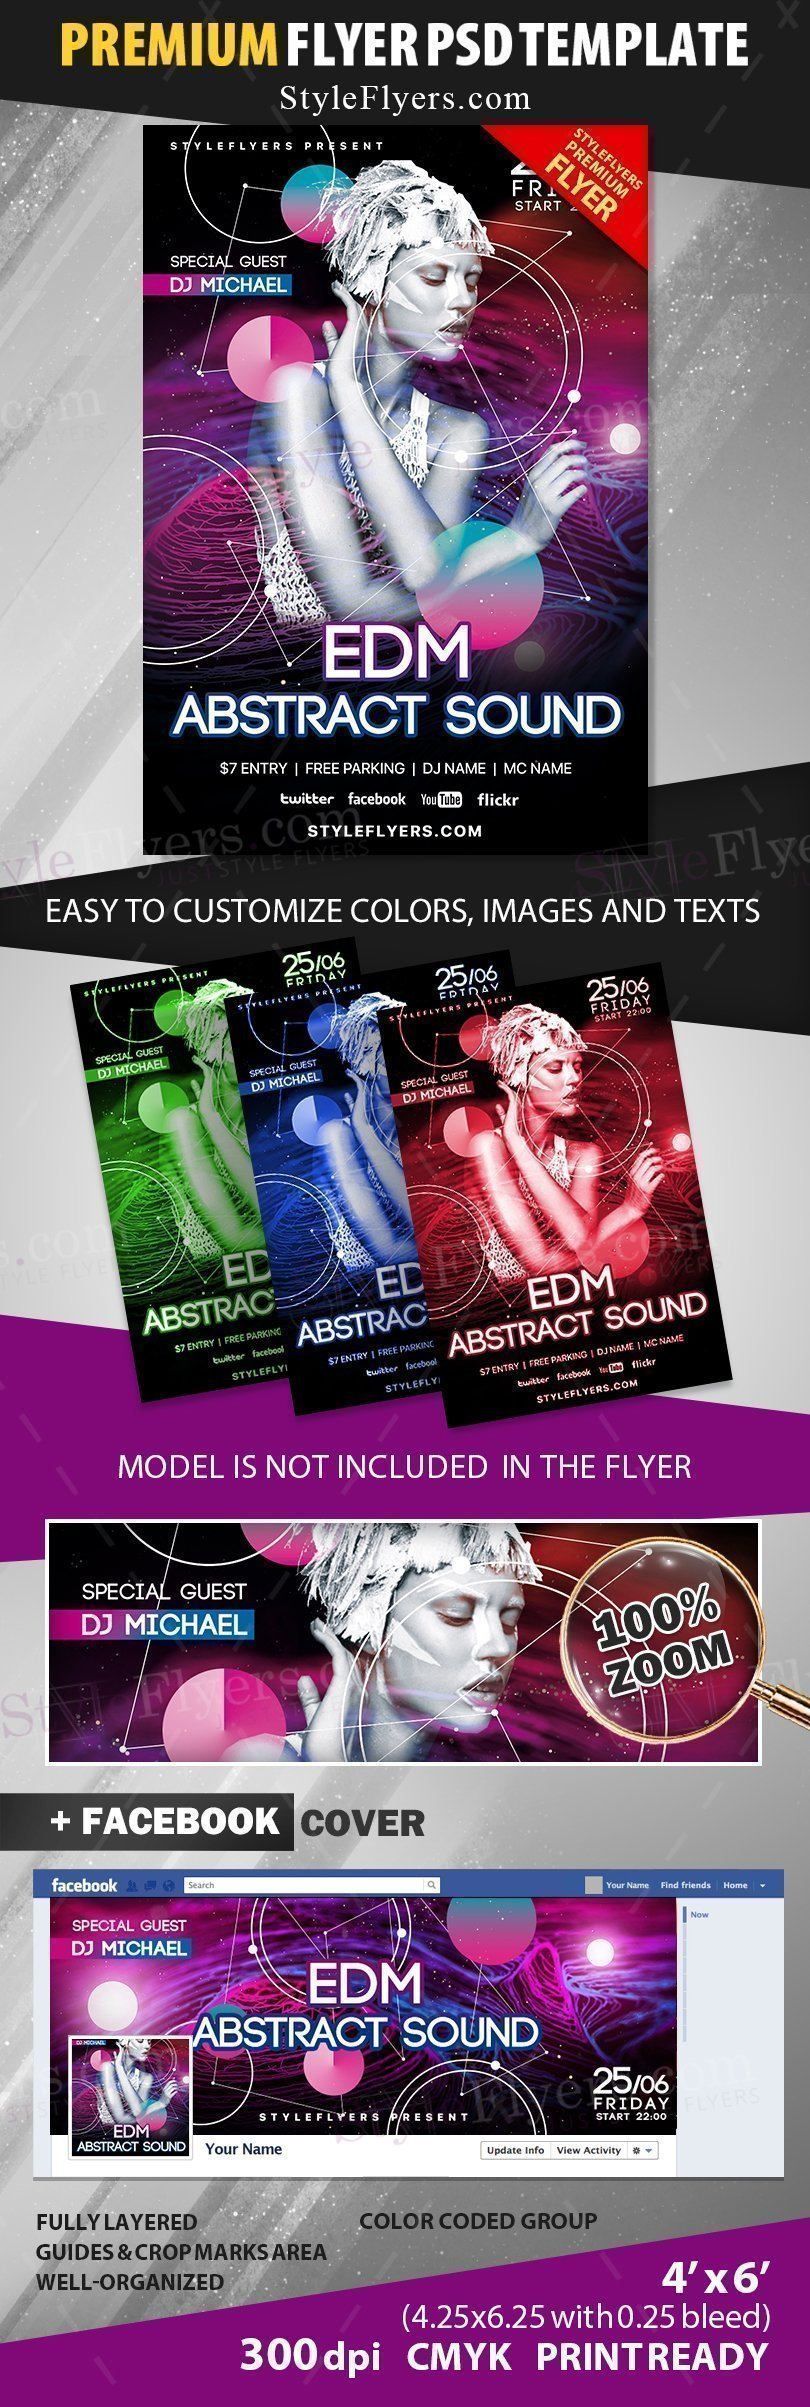 preview_edm abstract sound_psd_flyer